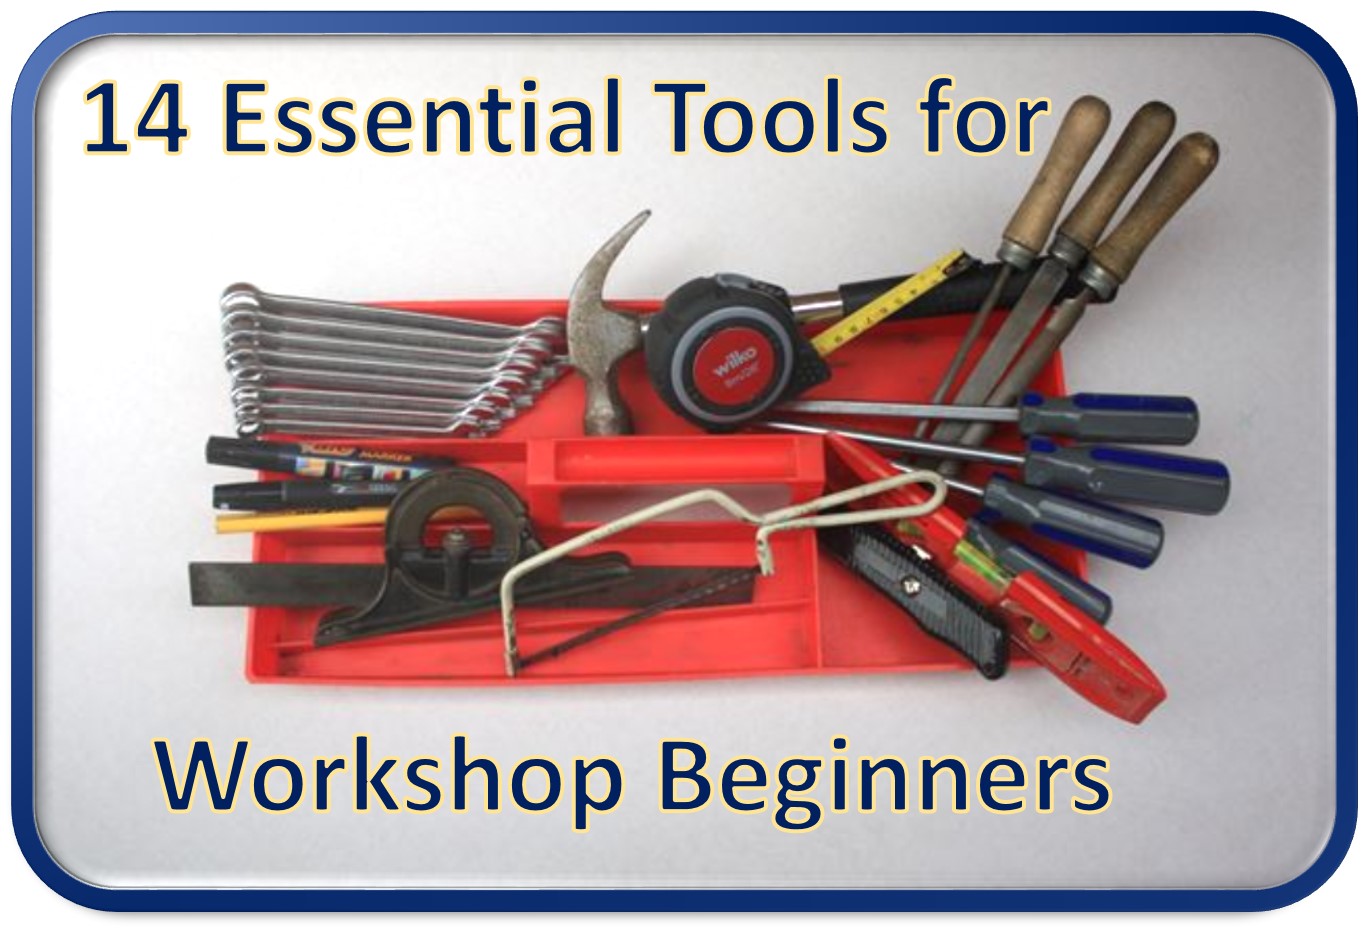 14 essential tools for workshop beginners feature image